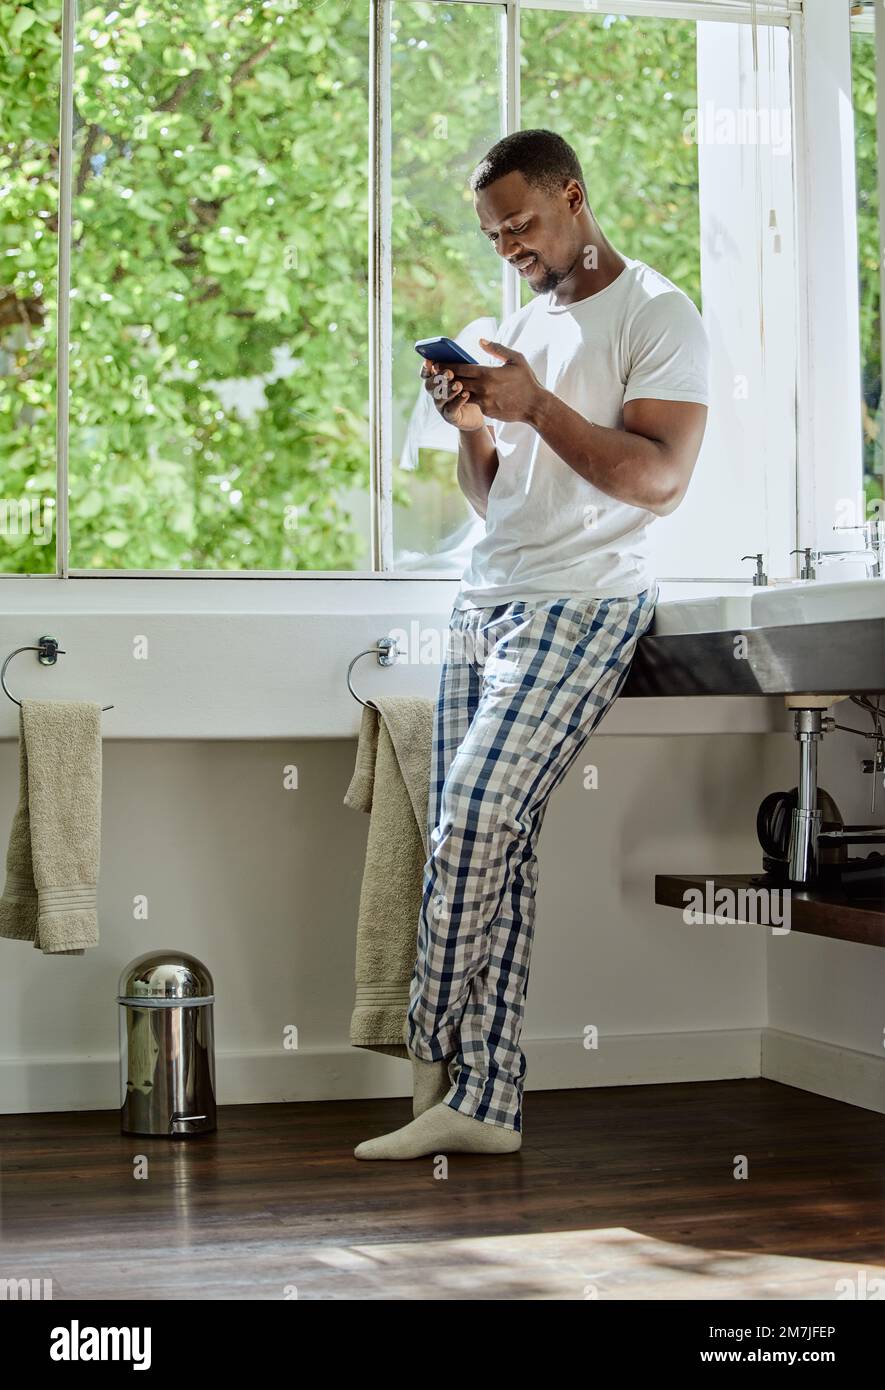 Home, phone and black man in bathroom on social media, texting or internet browsing. Relax, cellphone or happy male holding mobile smartphone for web Stock Photo